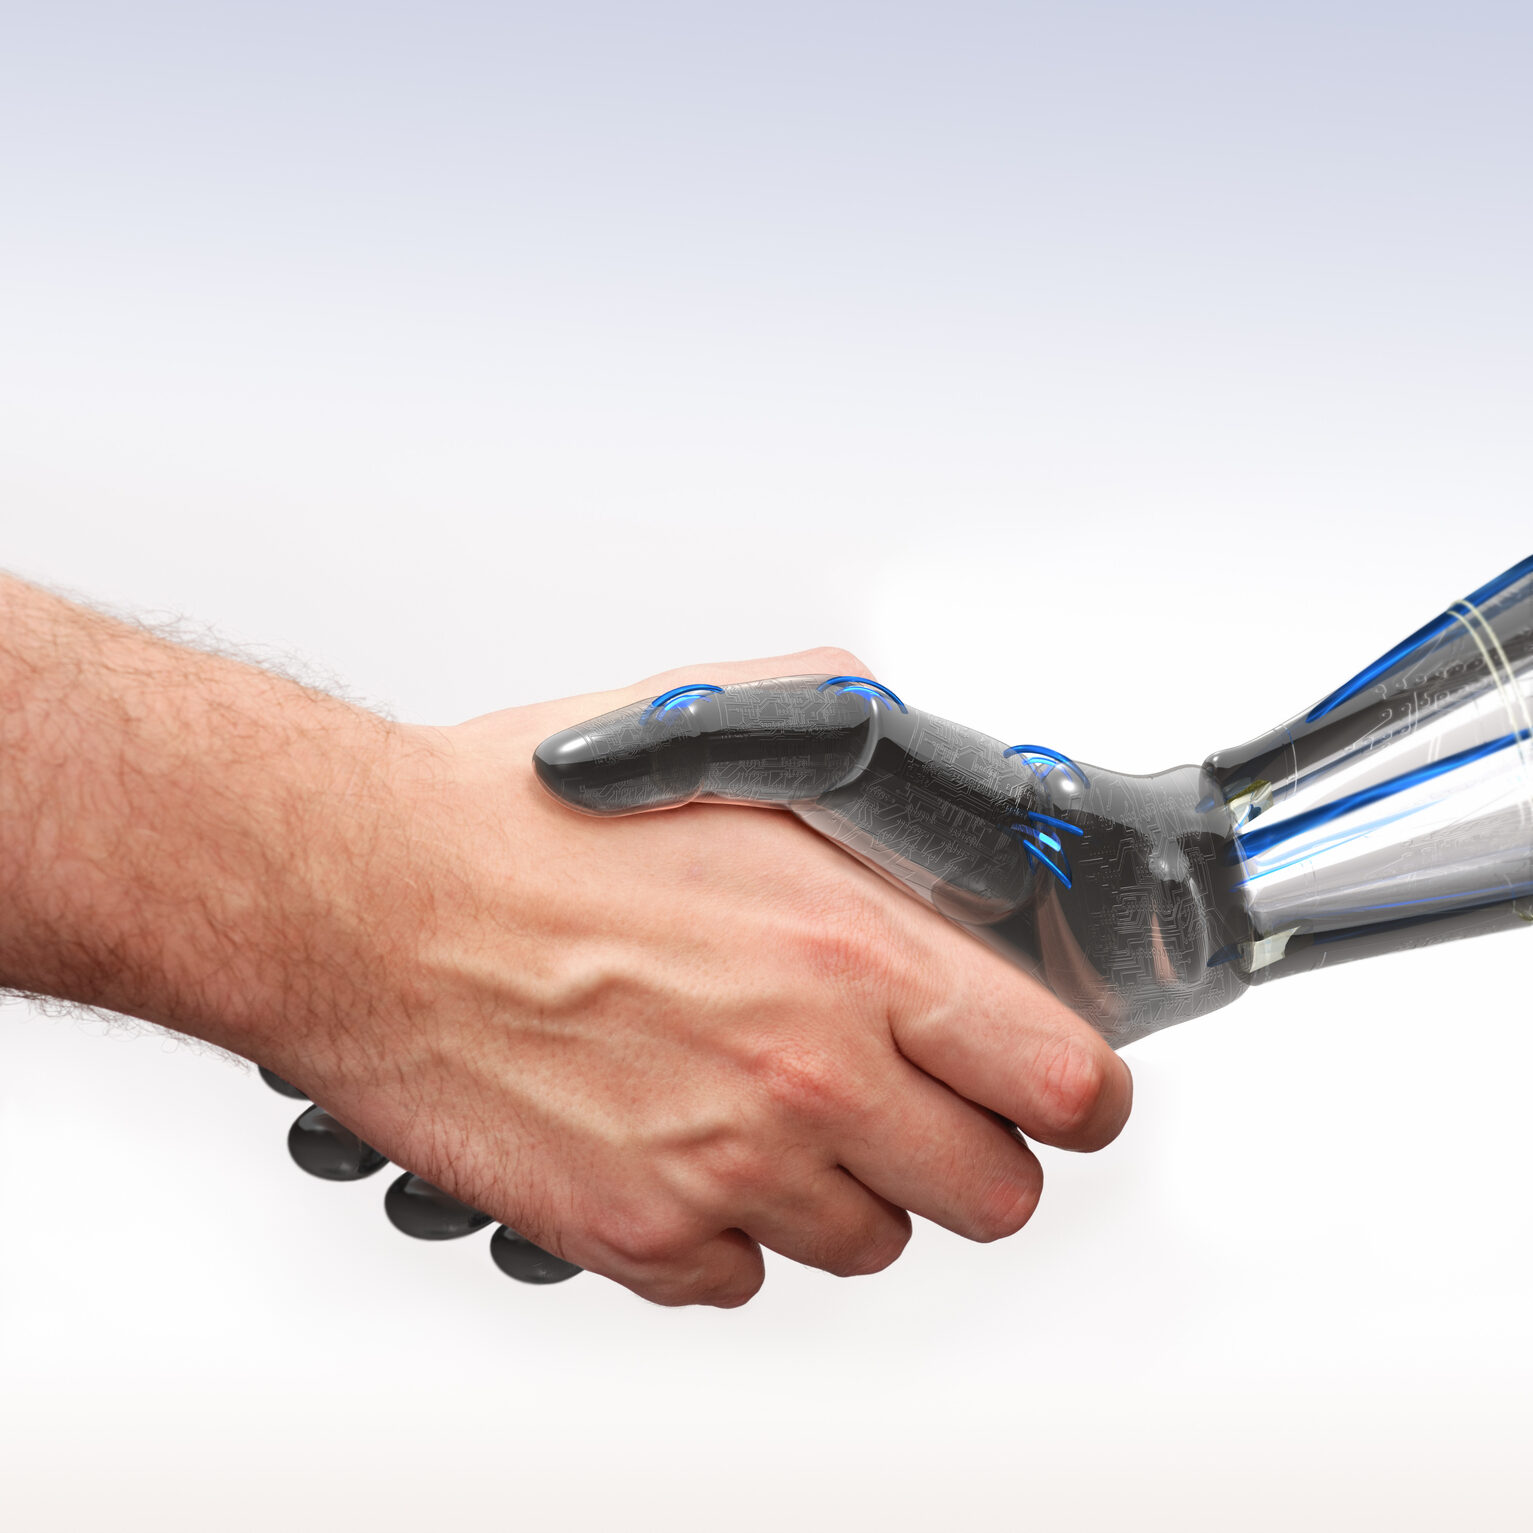 Variation of the classic handshake concept shot with a human hand and a robot hand.Very detailed rendering of the robotic hand, zoom in to view.